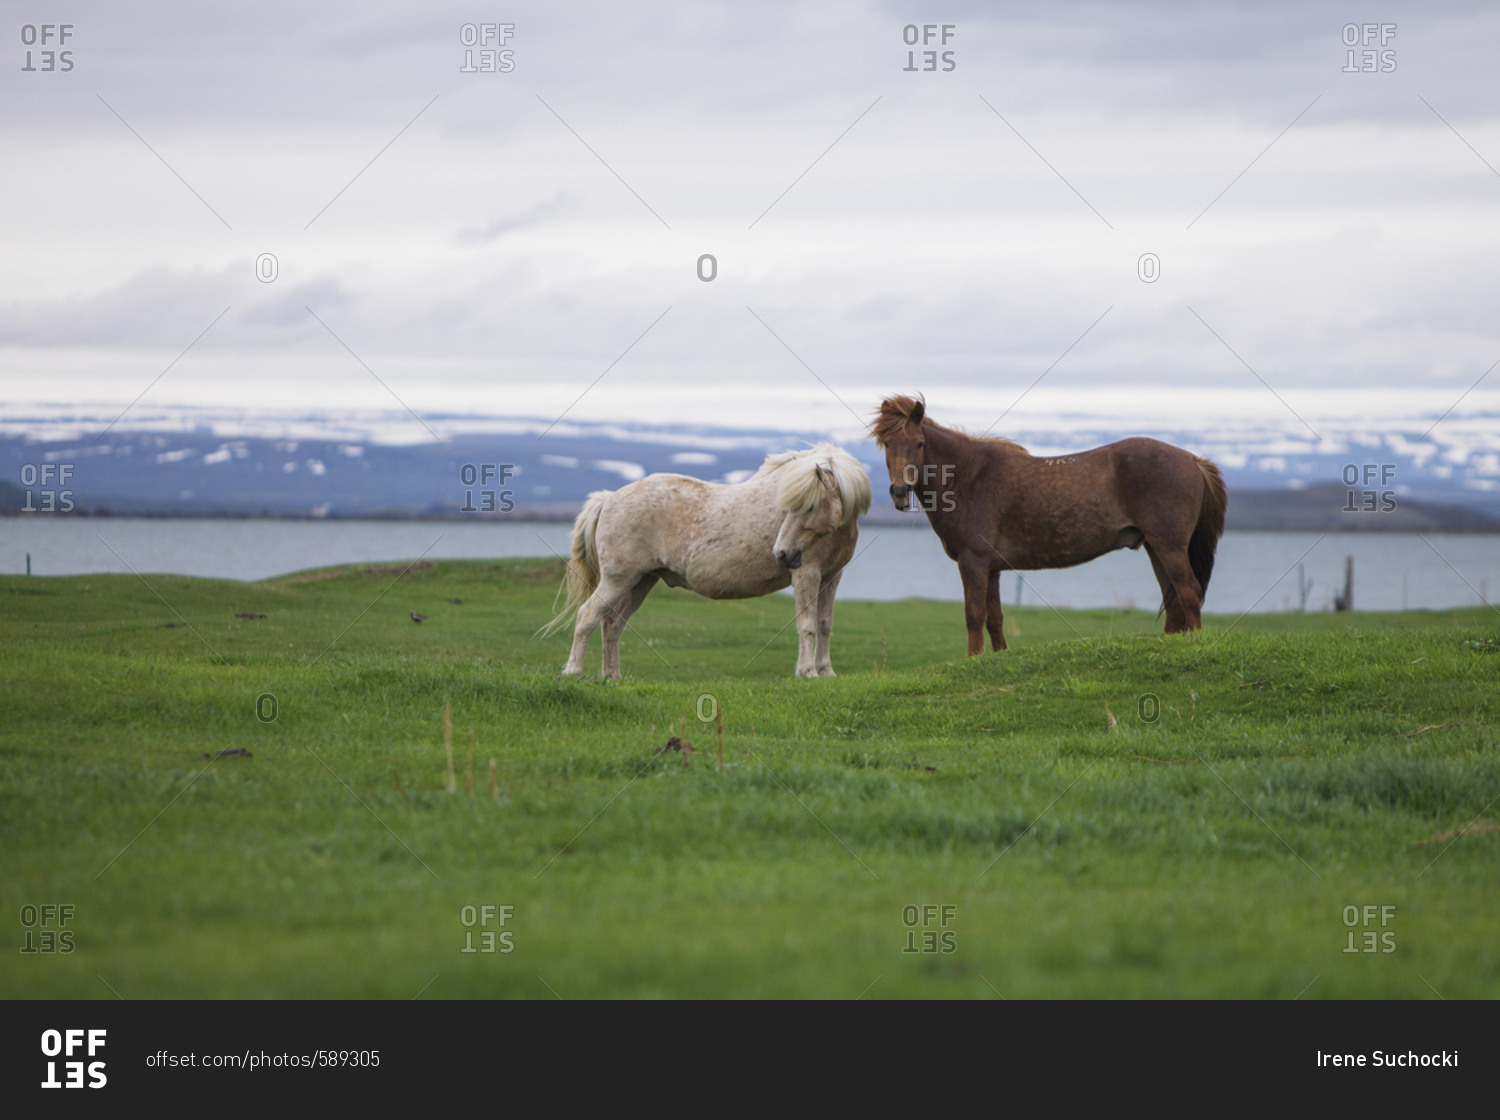 Two Icelandic horses standing in a grassy field